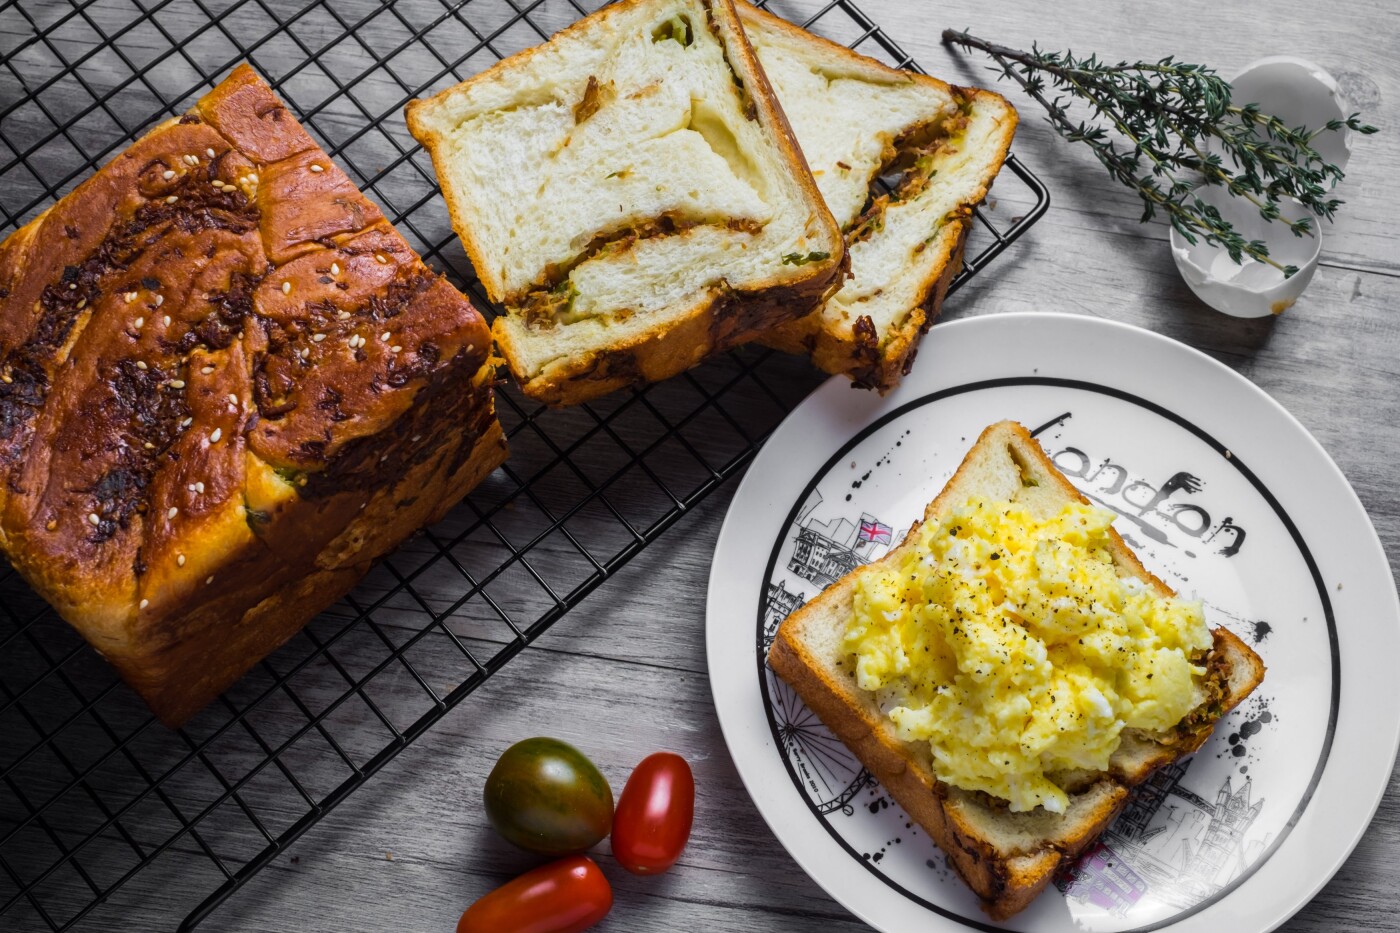 The best to feel the dough is to knead by your own. Green onion and dried pulled pork toast with scrambled duck eggs there are the perfect combination for breakfast.